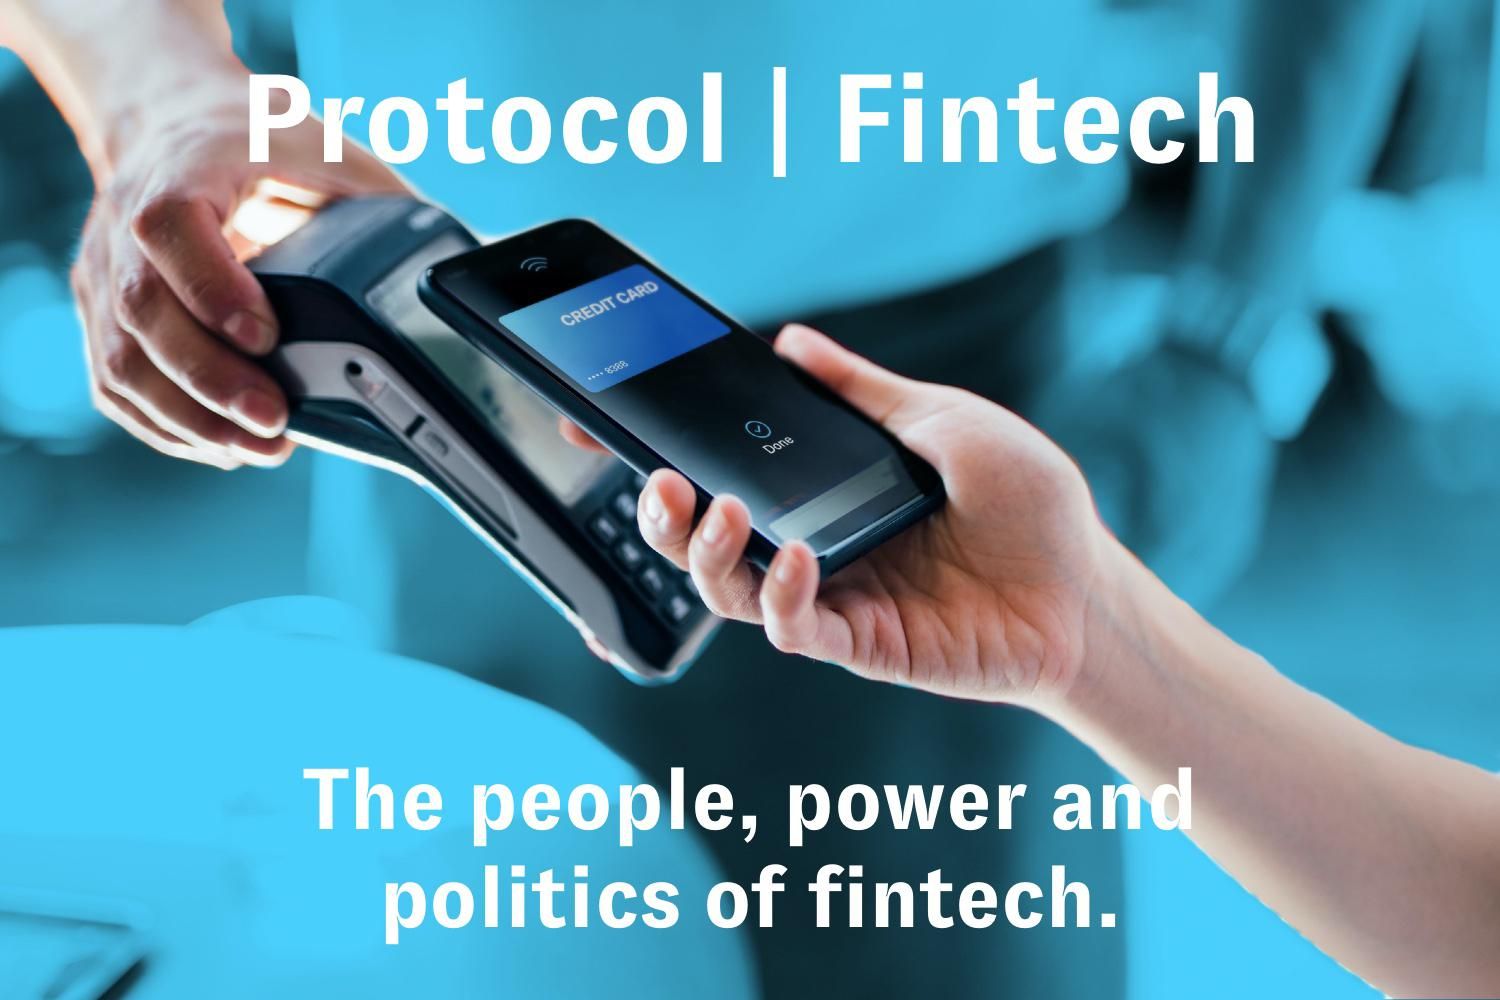 Thanks for reading Protocol Fintech